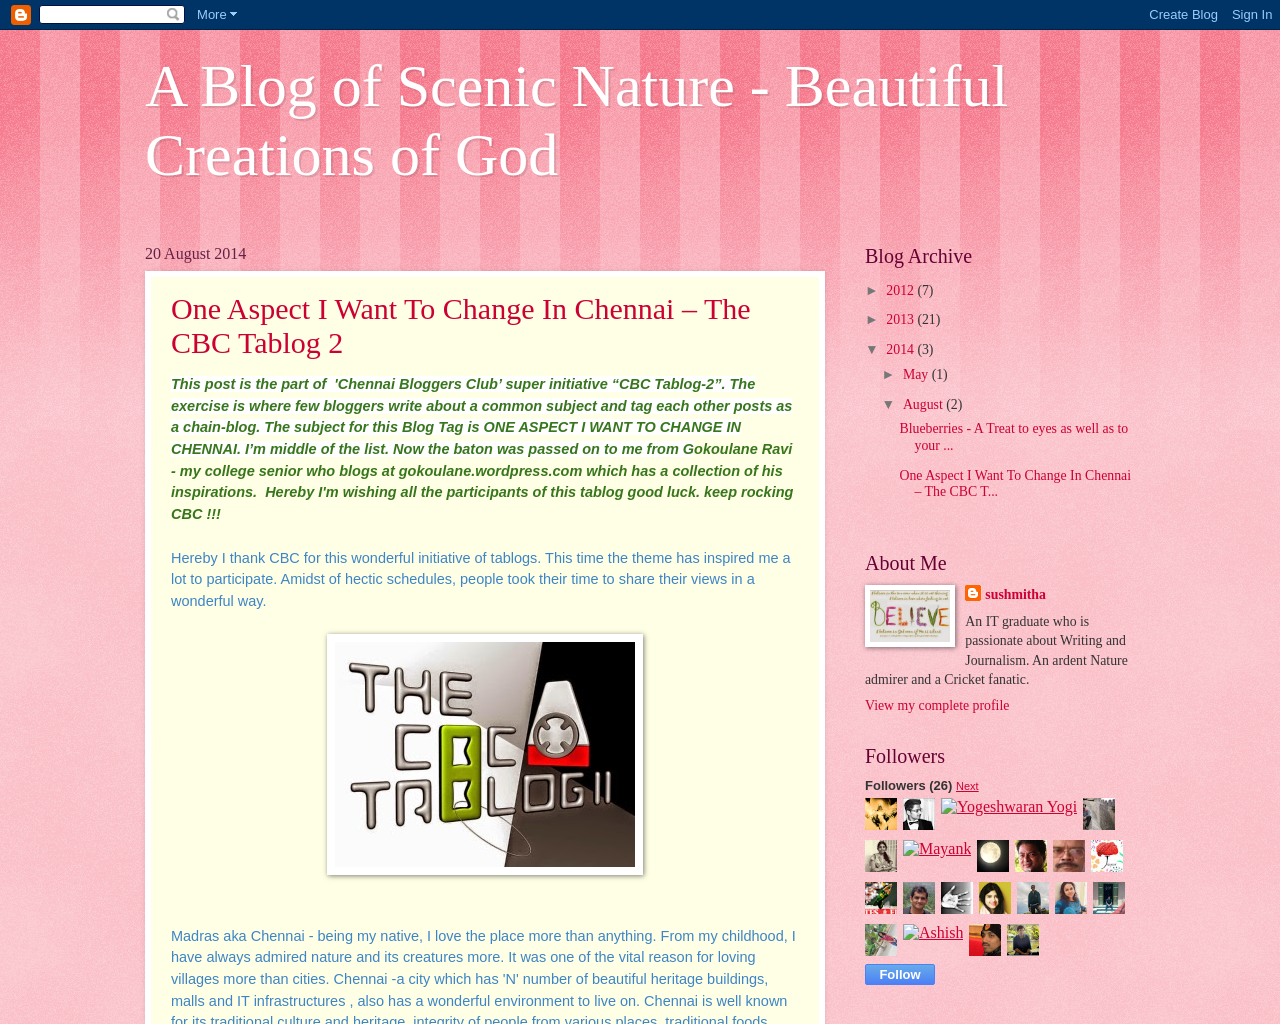 A Blog of Scenic Nature - Beautiful Creations of God